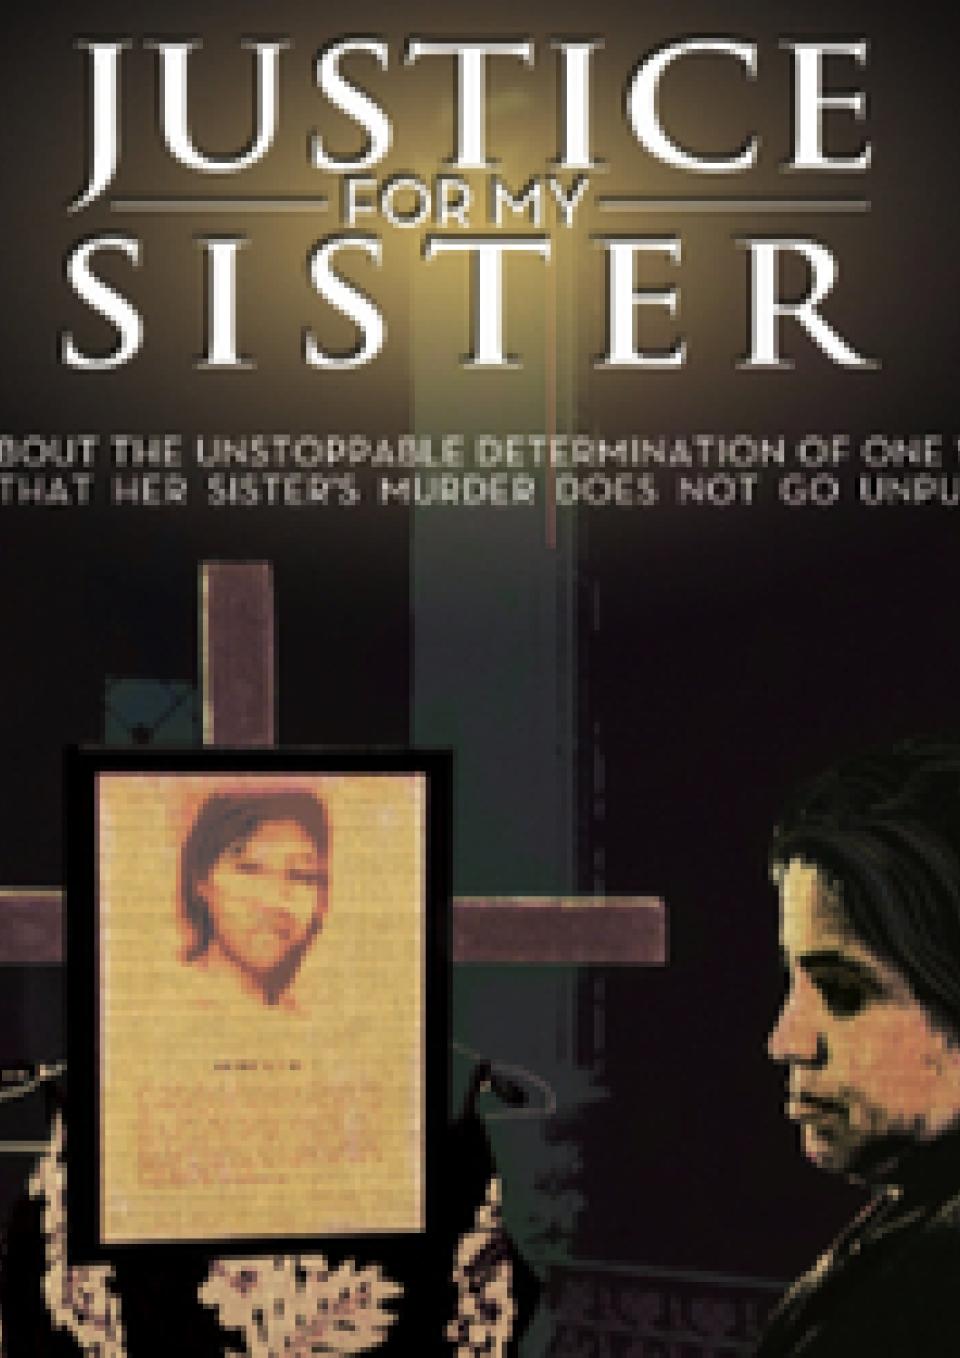 A poster for the New Day Film Justice For My Sister. A yellowed picture of a girl on a wooden cross with white flowers underneath. A person stands in front of the cross and looks down with a sad expression. The background is dark with a stripe down the middle. At the top of the image are the words “Justice For My Sister” in large white letters.